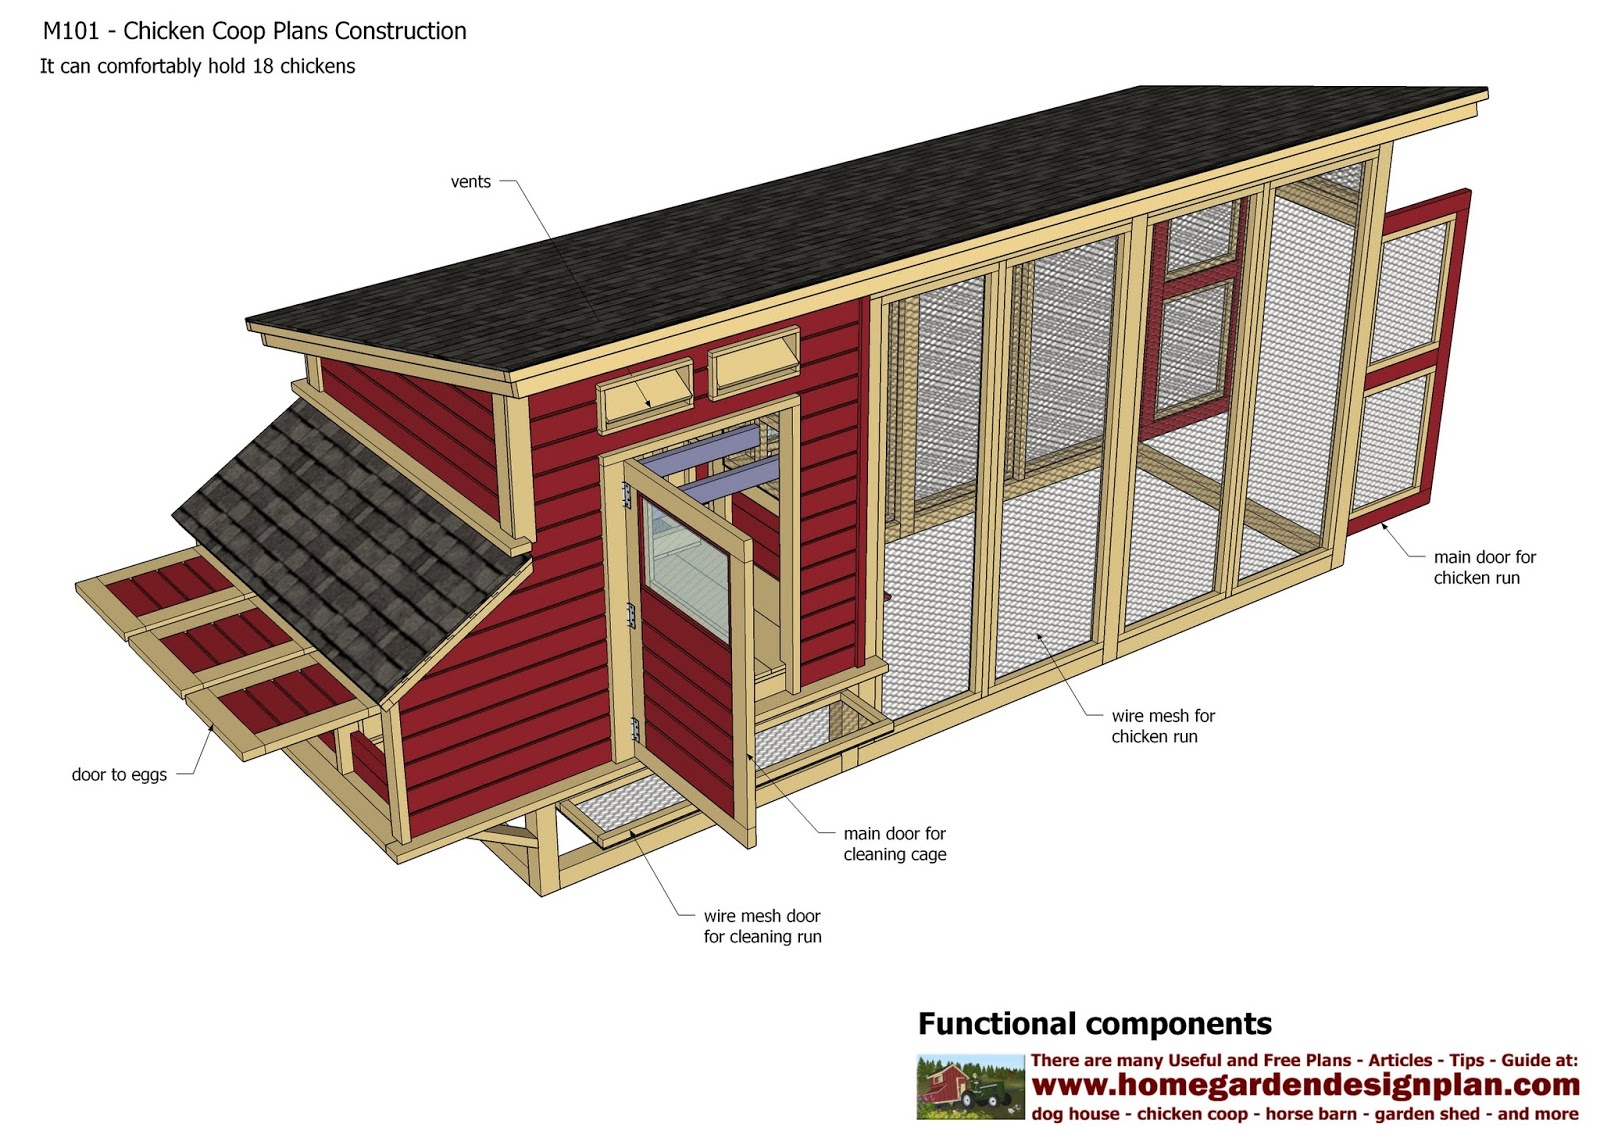 Free Printable Chicken Coop Plans - 0.3.1+ +M101+ +chicken+coop+plans+free+ +chicken+coop+Design+free+ +chicken+coop+plans+construction